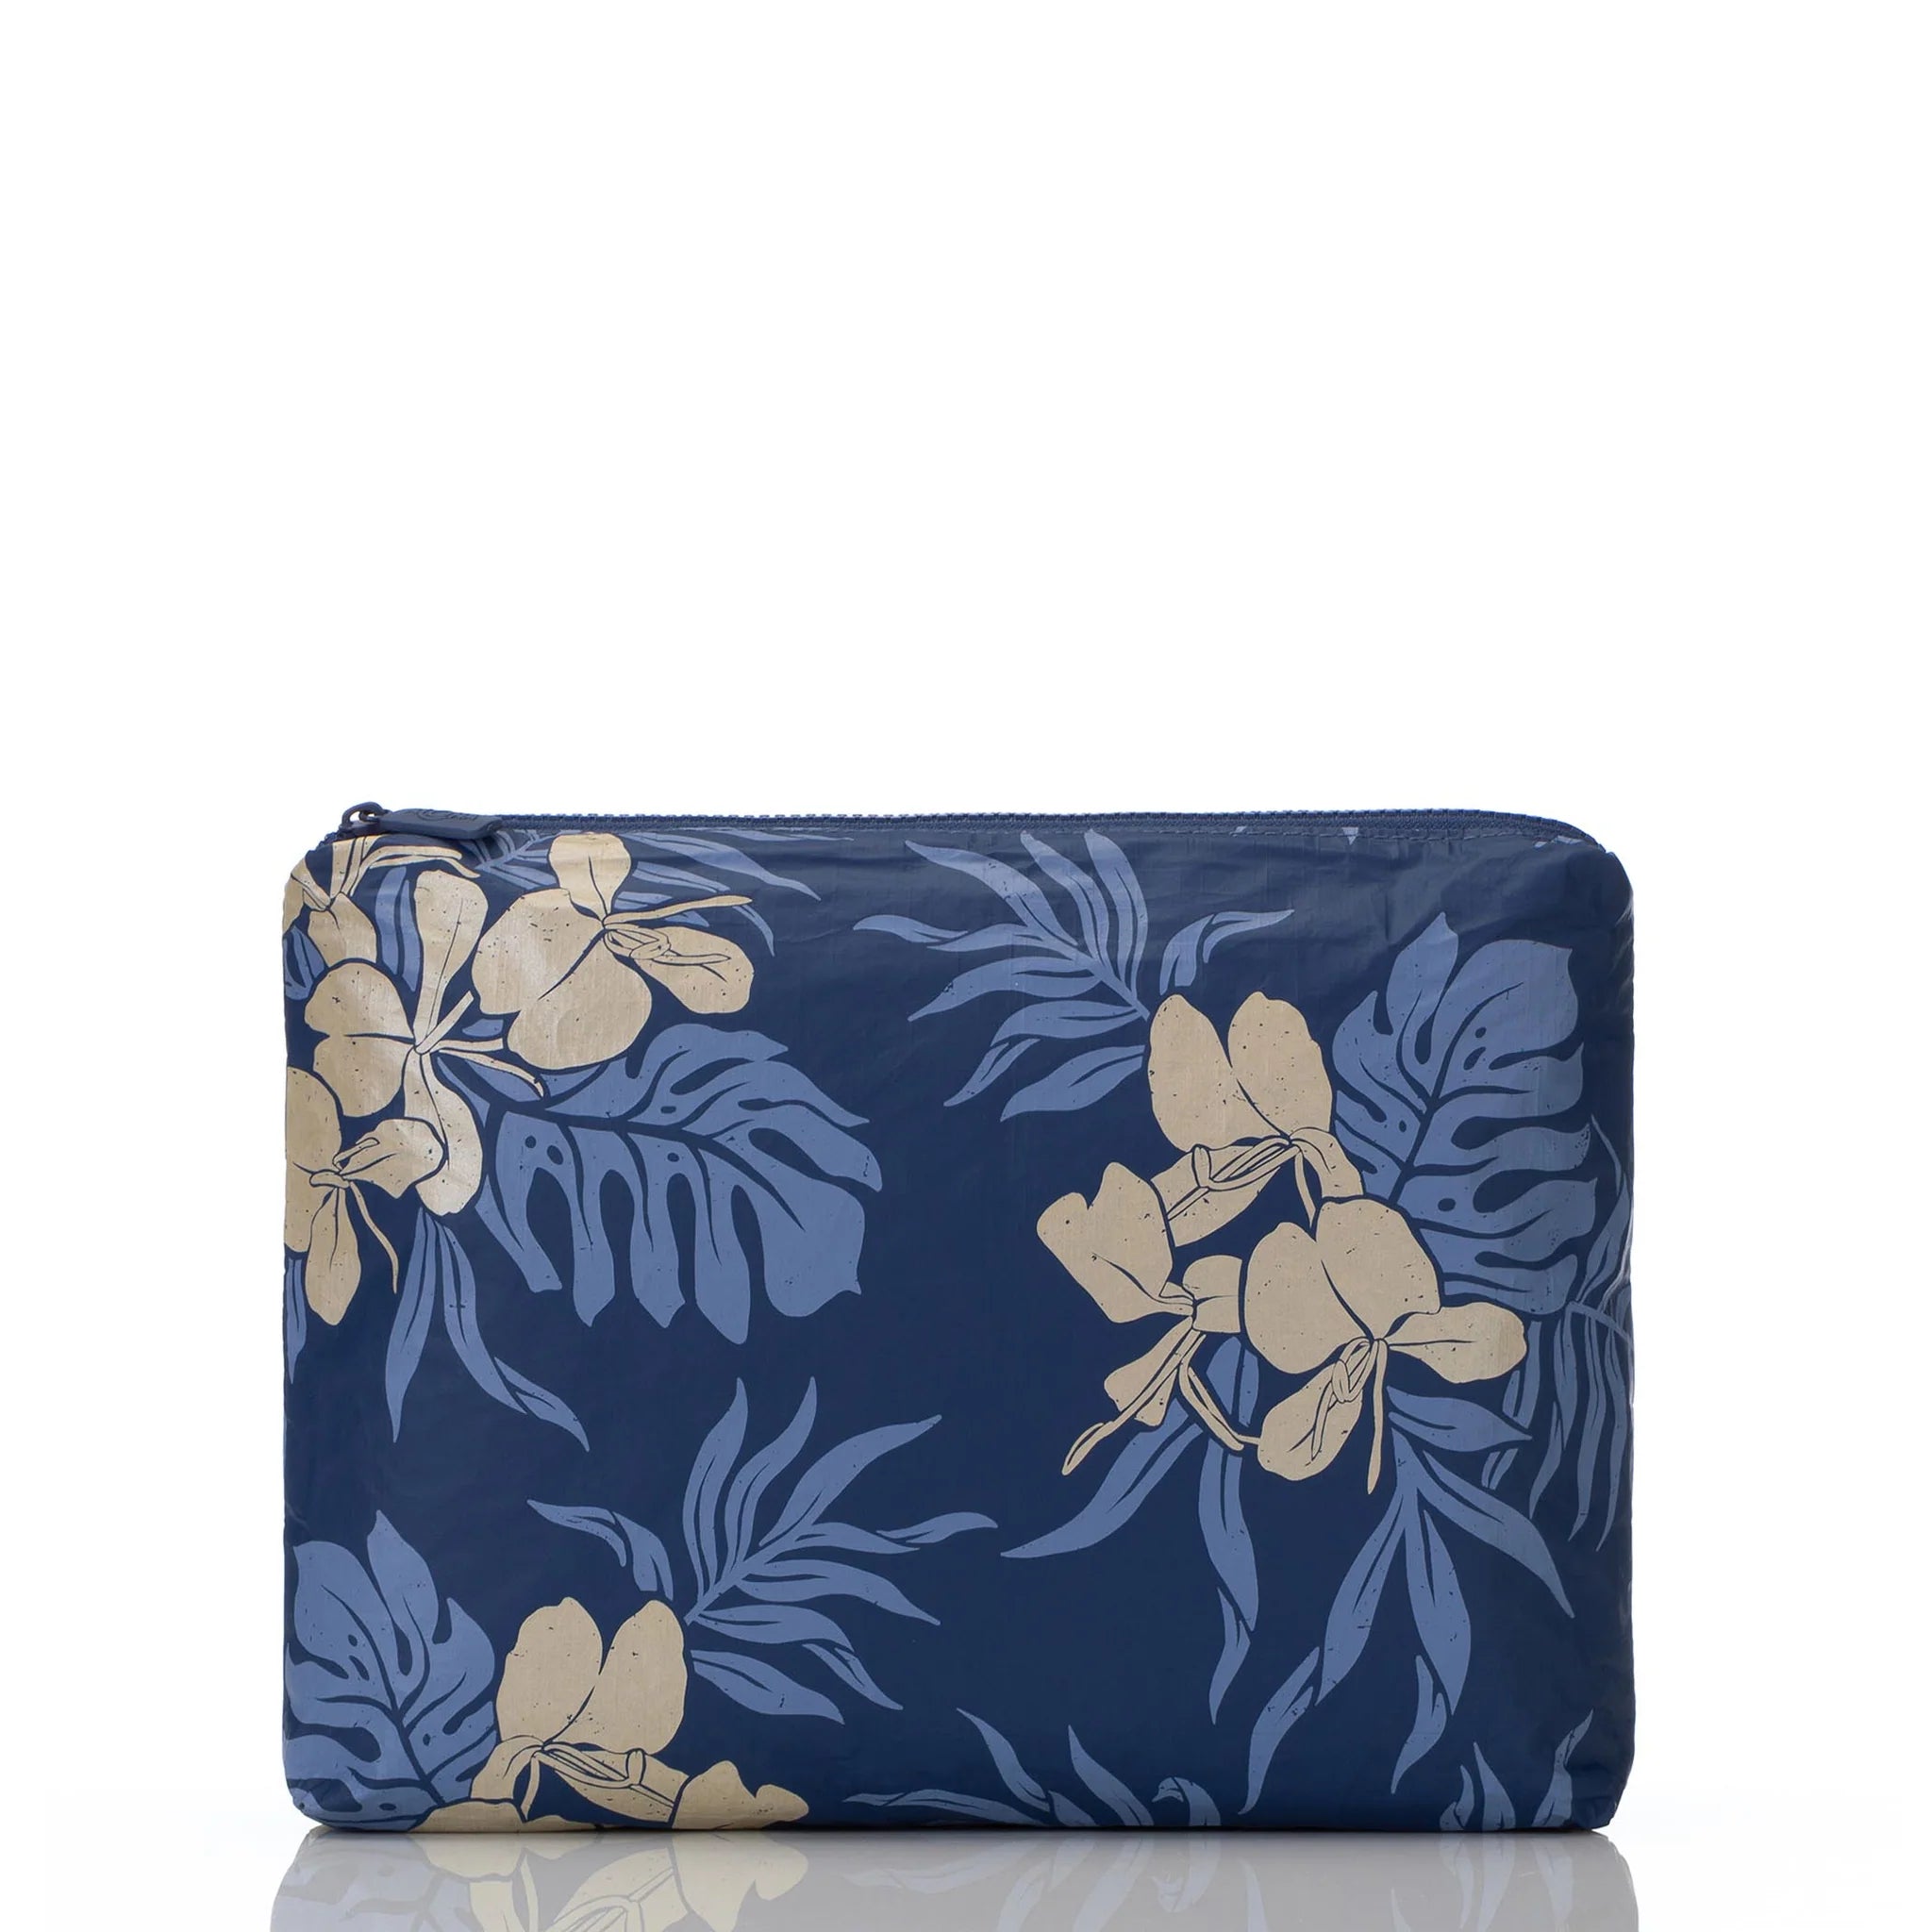 Ginger Dream Mid Pouch / Hanalei Moon Navy